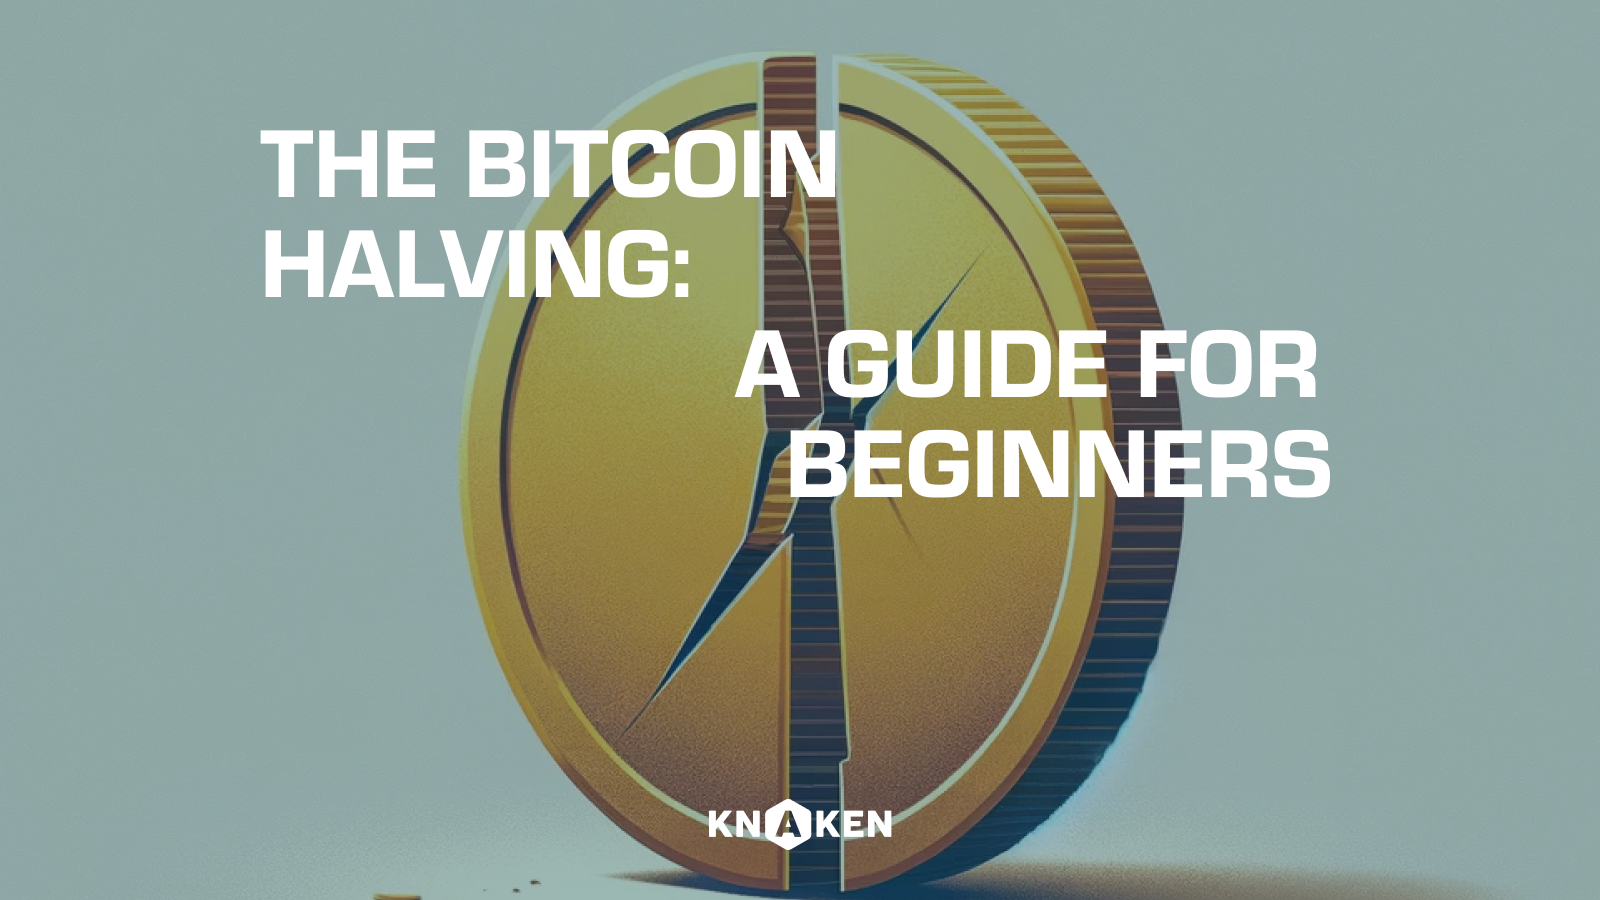 The Bitcoin Halving: A Guide for Beginners